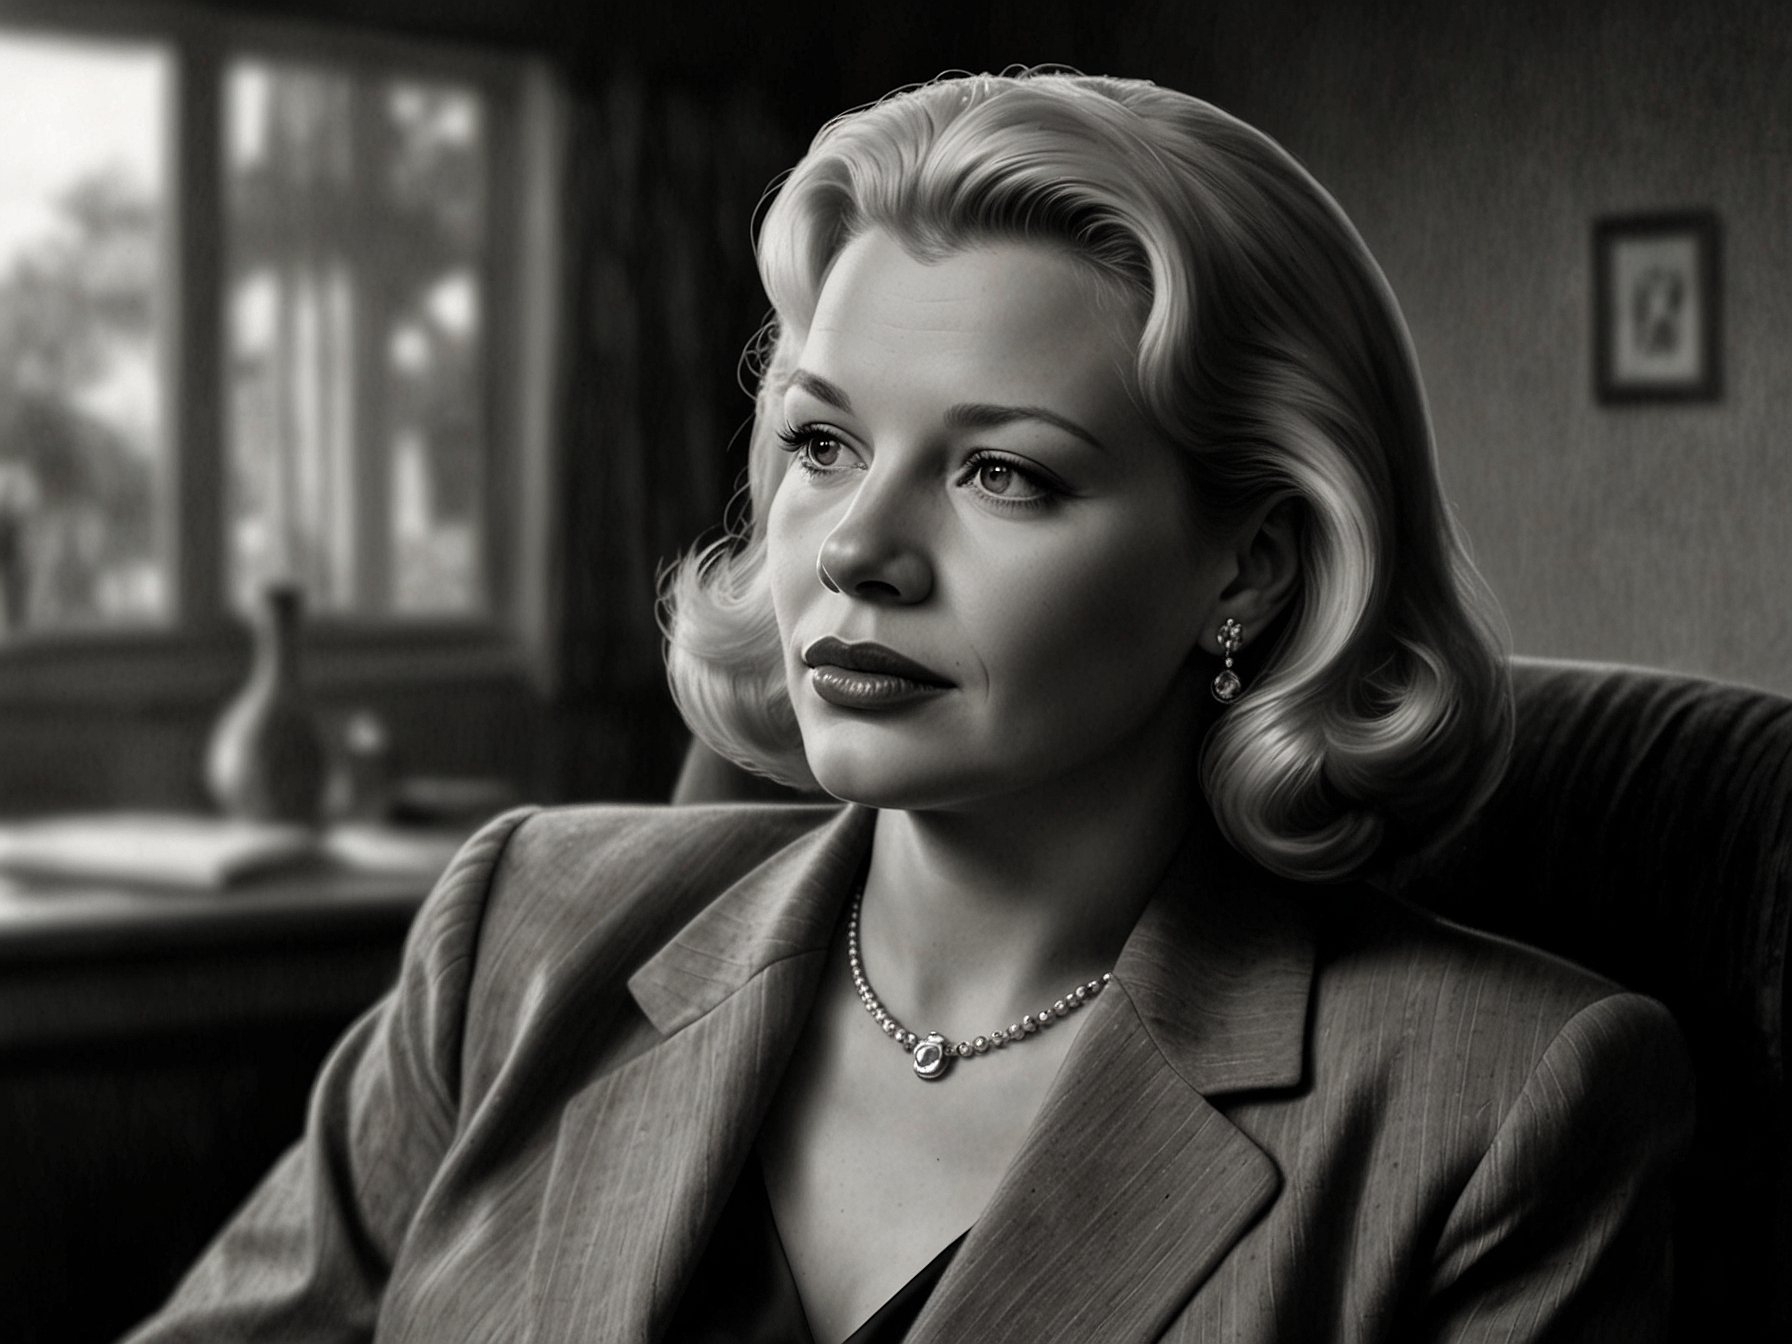 Gena Rowlands, in a classic movie scene, showcasing her extraordinary acting talent that has captivated audiences for over six decades. This image reinforces her influential legacy in cinema.